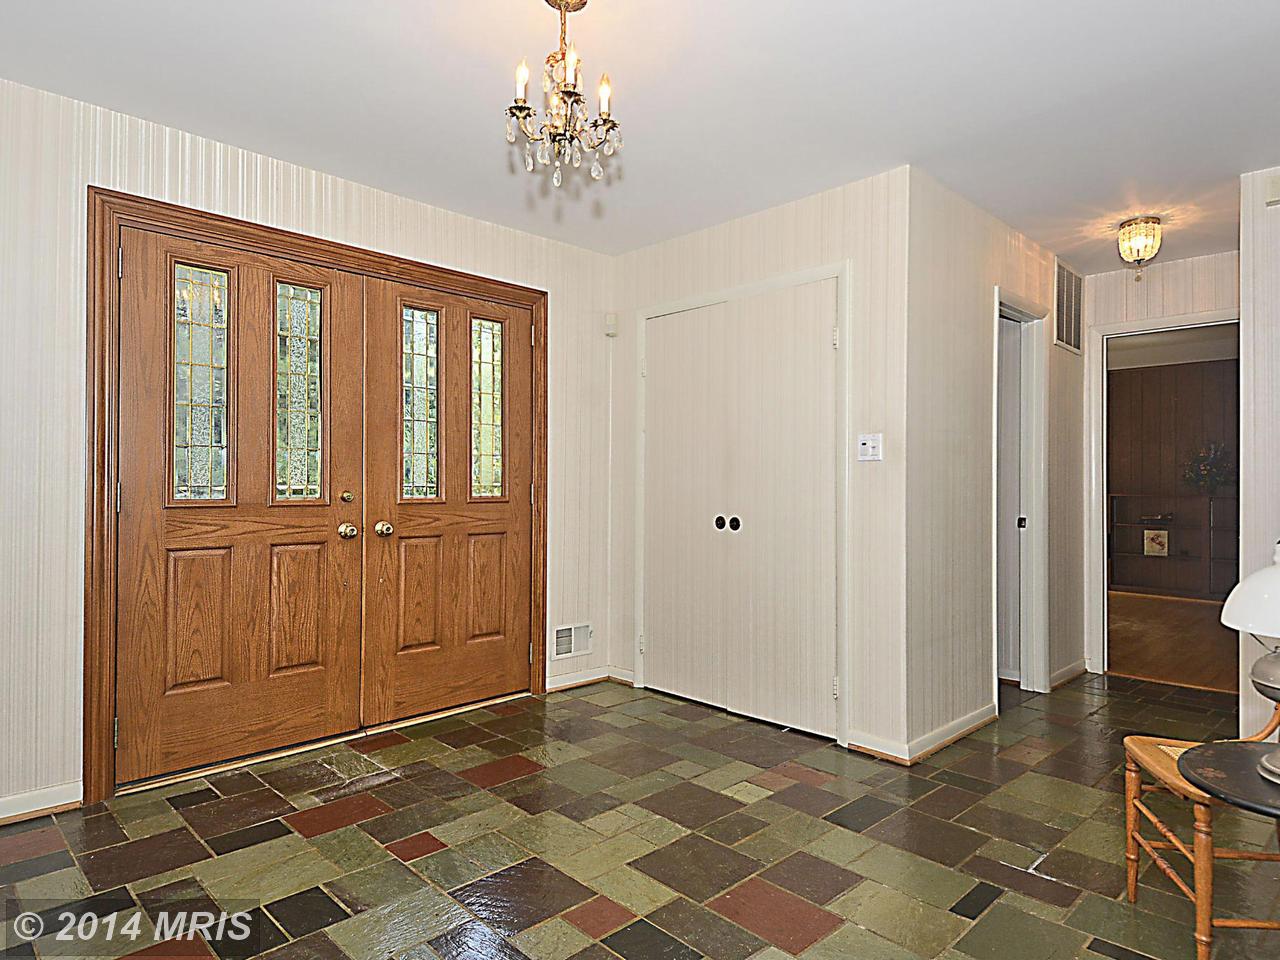 11909 VIEWCREST TER, SILVER SPRING, MD 20902 - Photo 2